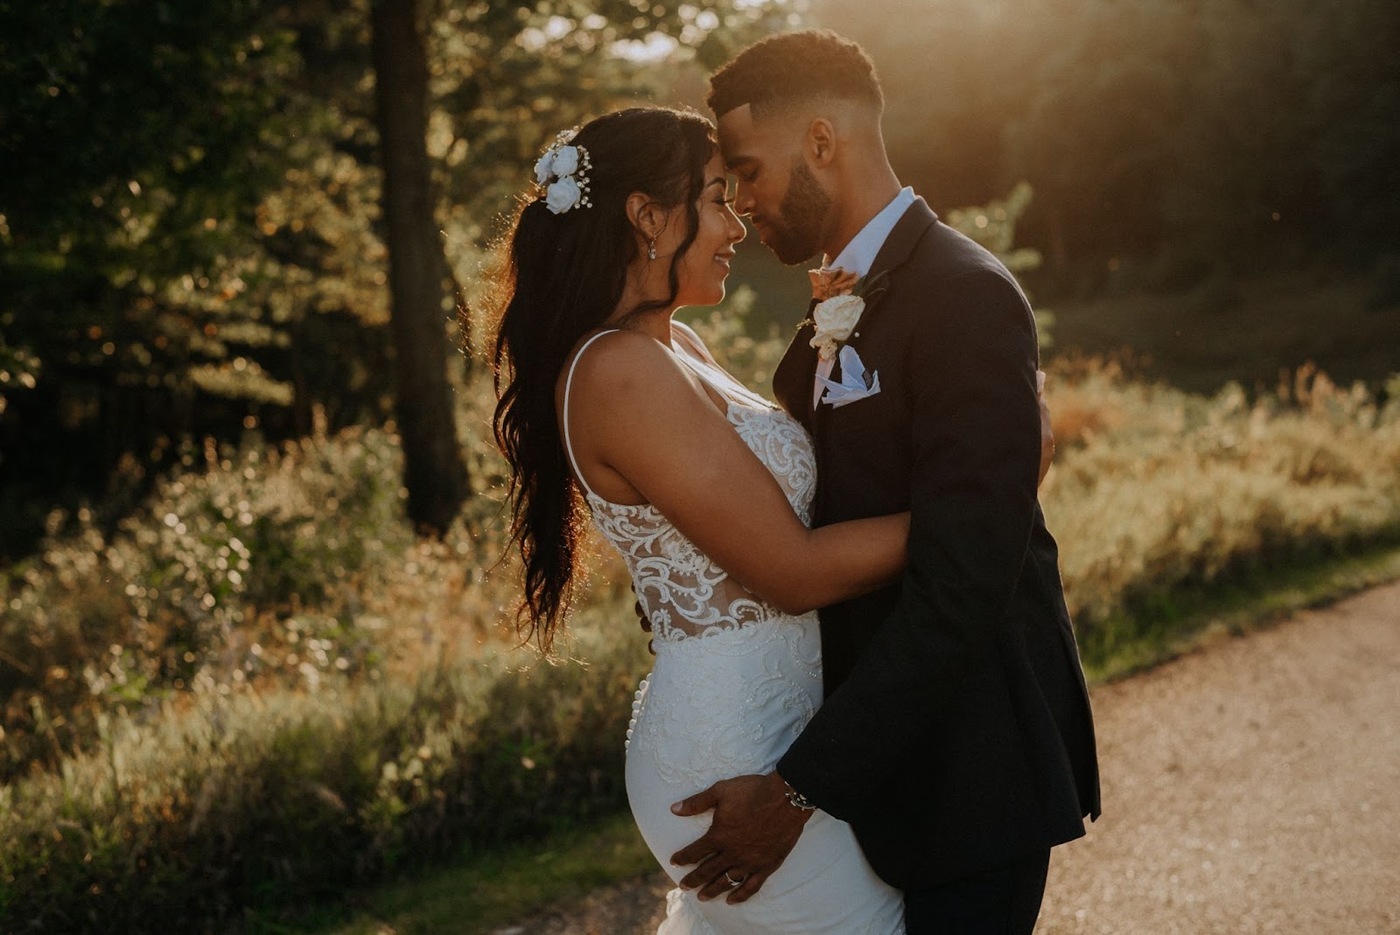 With more than 15 years of experience in the field and having shot more than 300 weddings all over the world, Kendra Lynece has become the go-to wedding photographer for couples in the Midwest region for a comfortable experience and impeccable results.